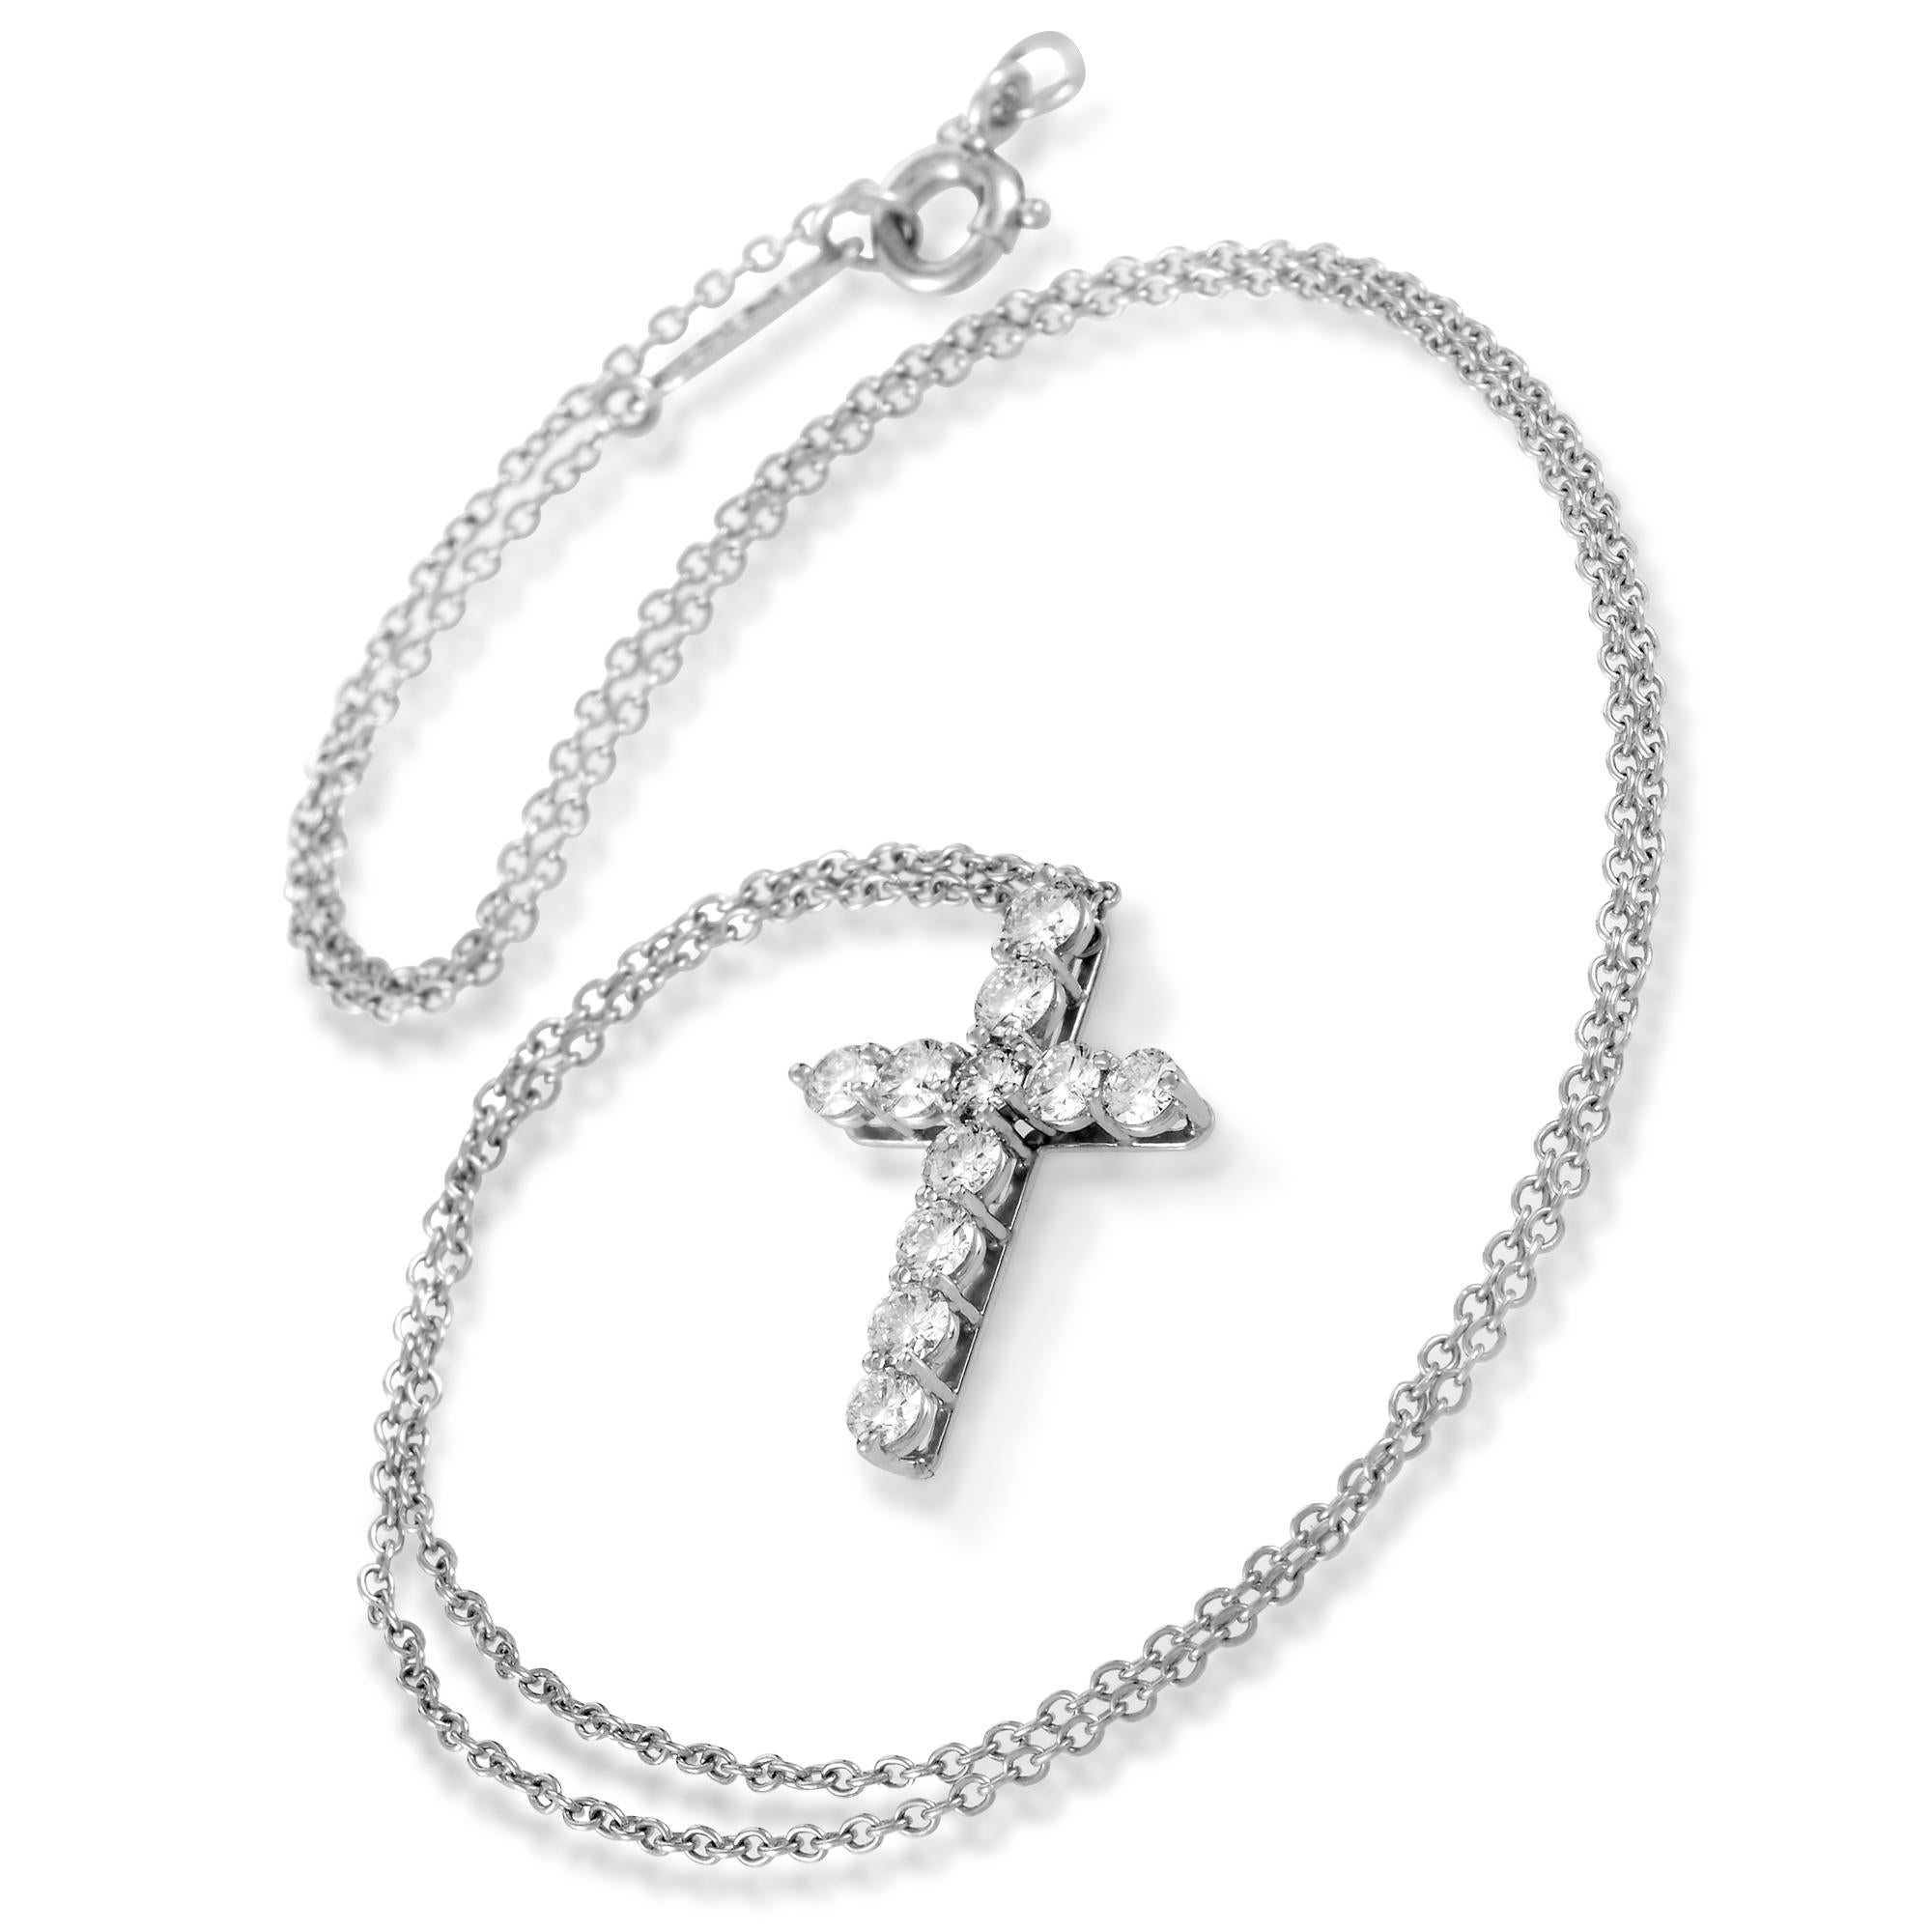 This luxurious Tiffany & Co. necklace comes with a neatly crafted rolo chain from which hangs a dazzling cross pendant lavishly set with diamonds weighing 0.42ct in total. The necklace is made of finest 950 platinum and weighs 3.5 grams.

Included